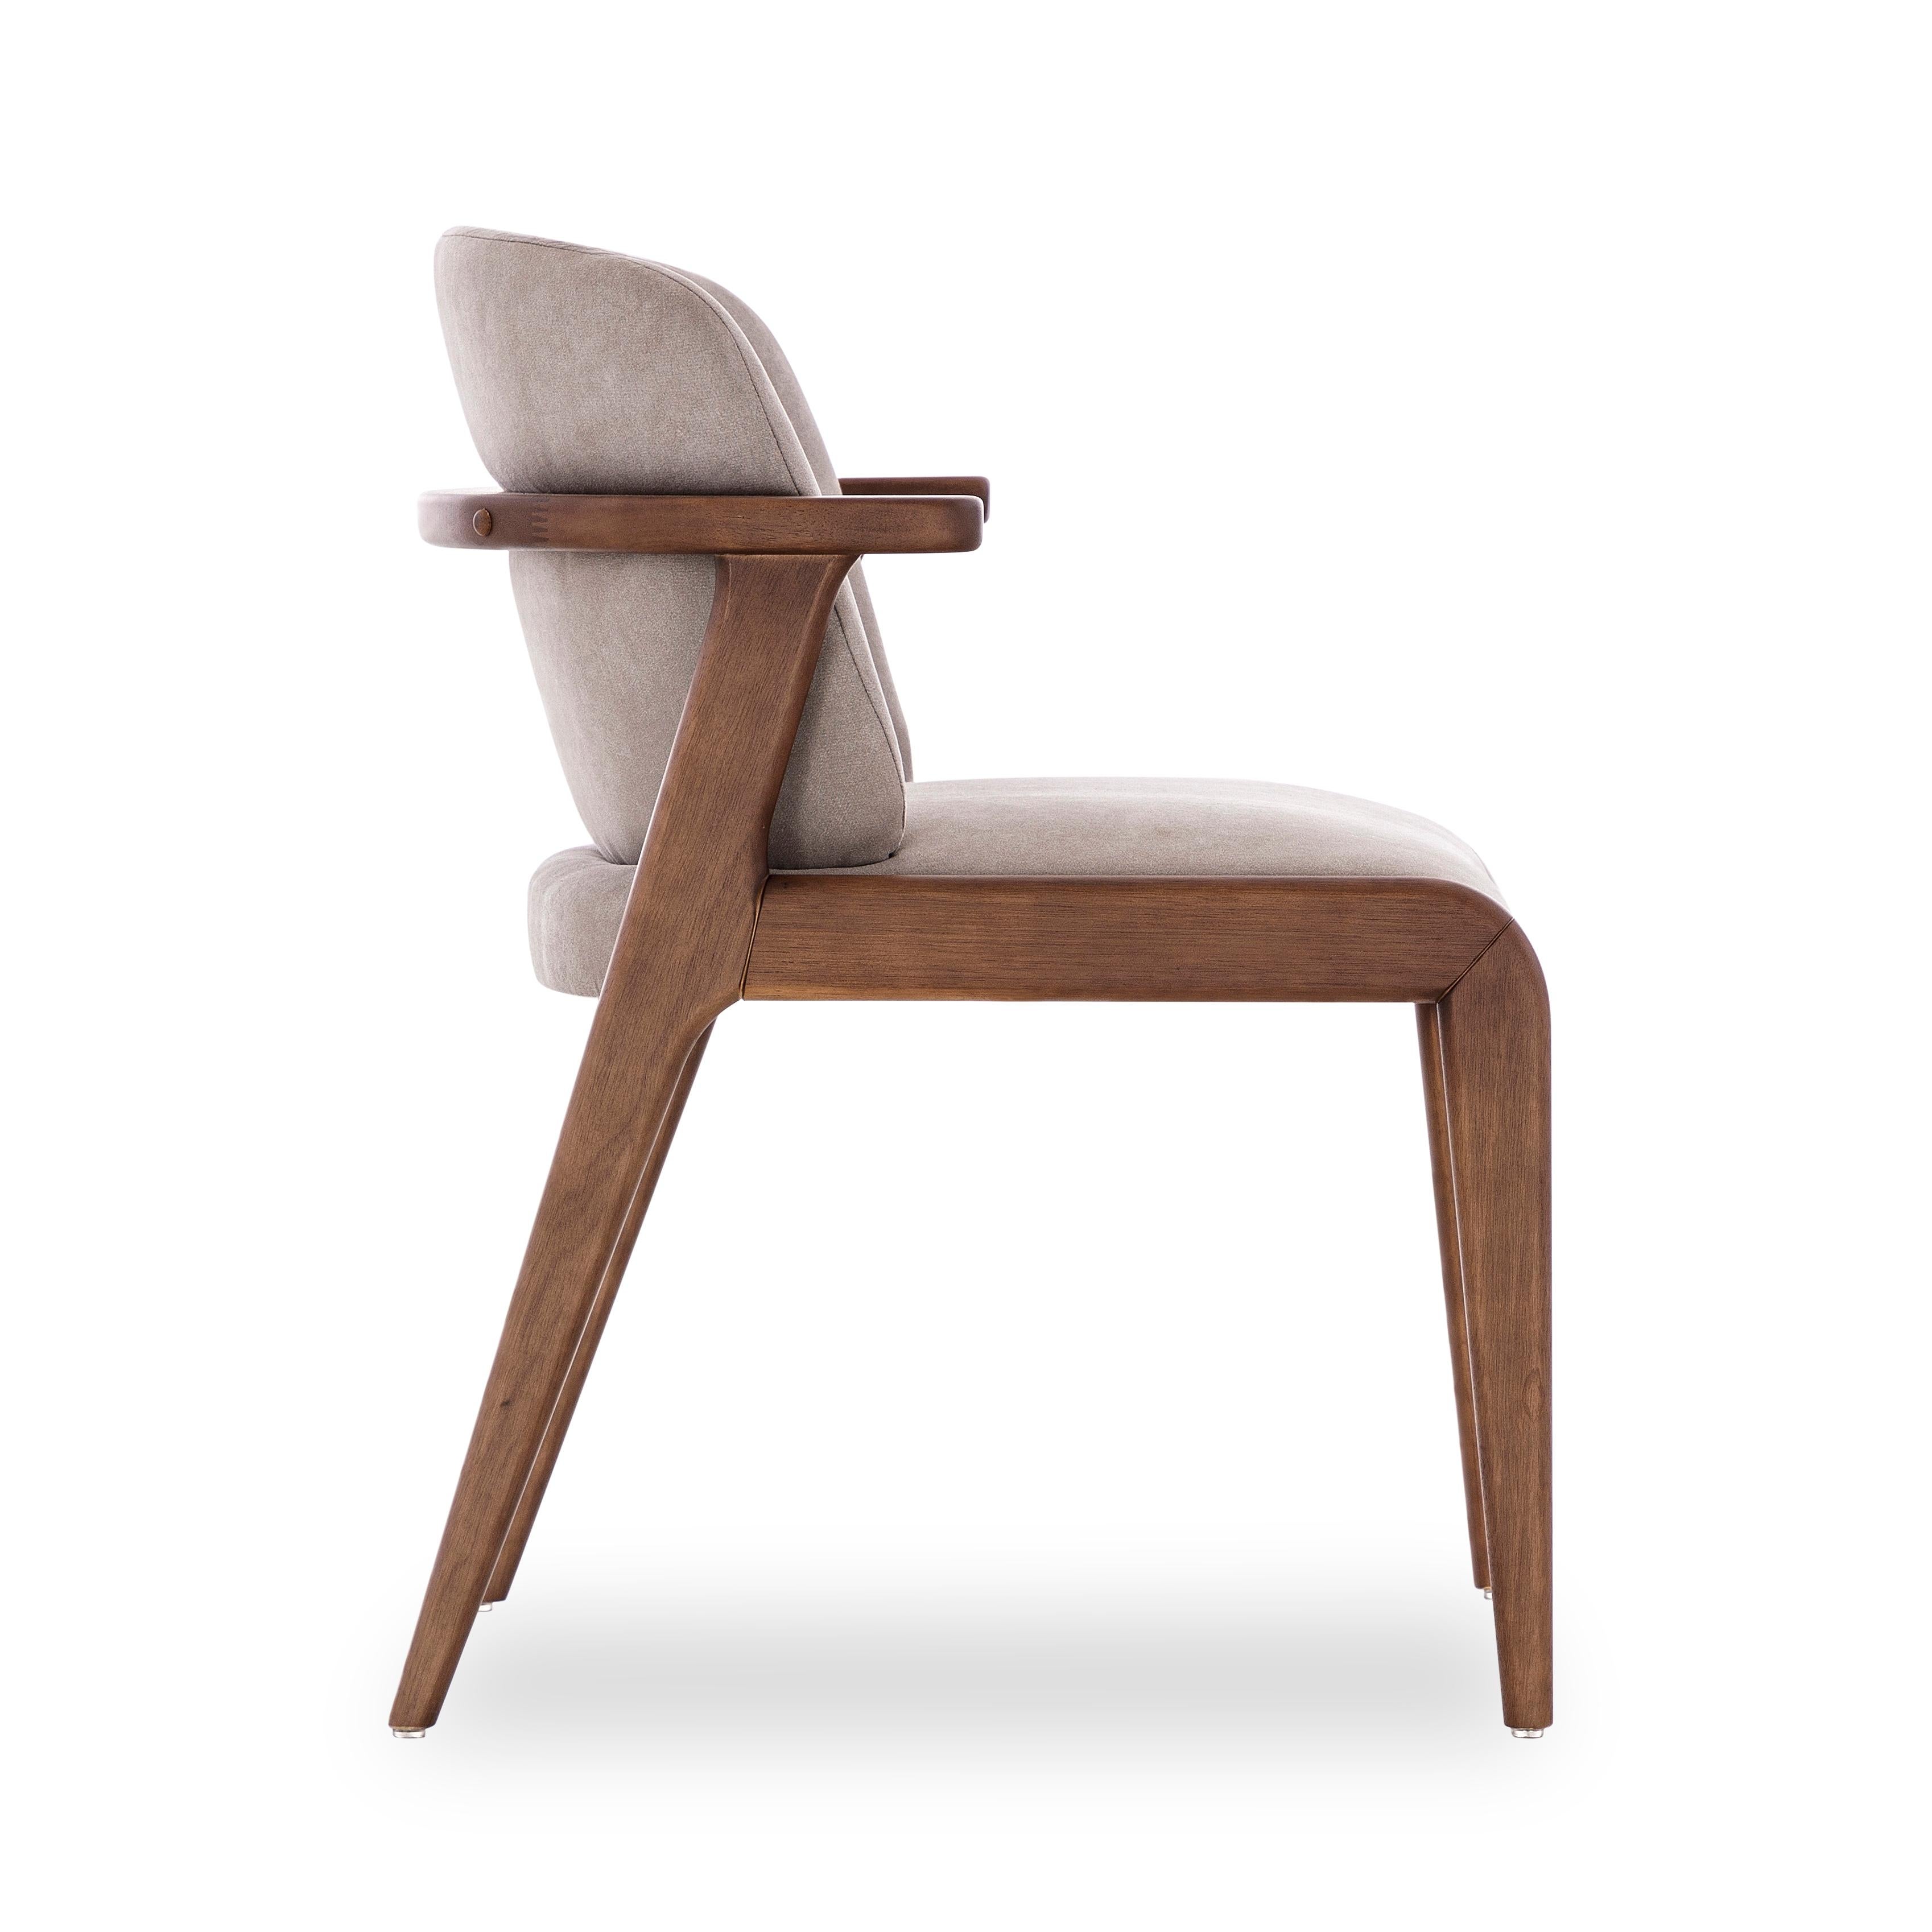 The creative team at Uultis created this dining room chair to embellish that family space with a frame and legs that are made of wood in a walnut finish, combining it with a light brown cotton beautiful fabric. It is a chair designed to provide